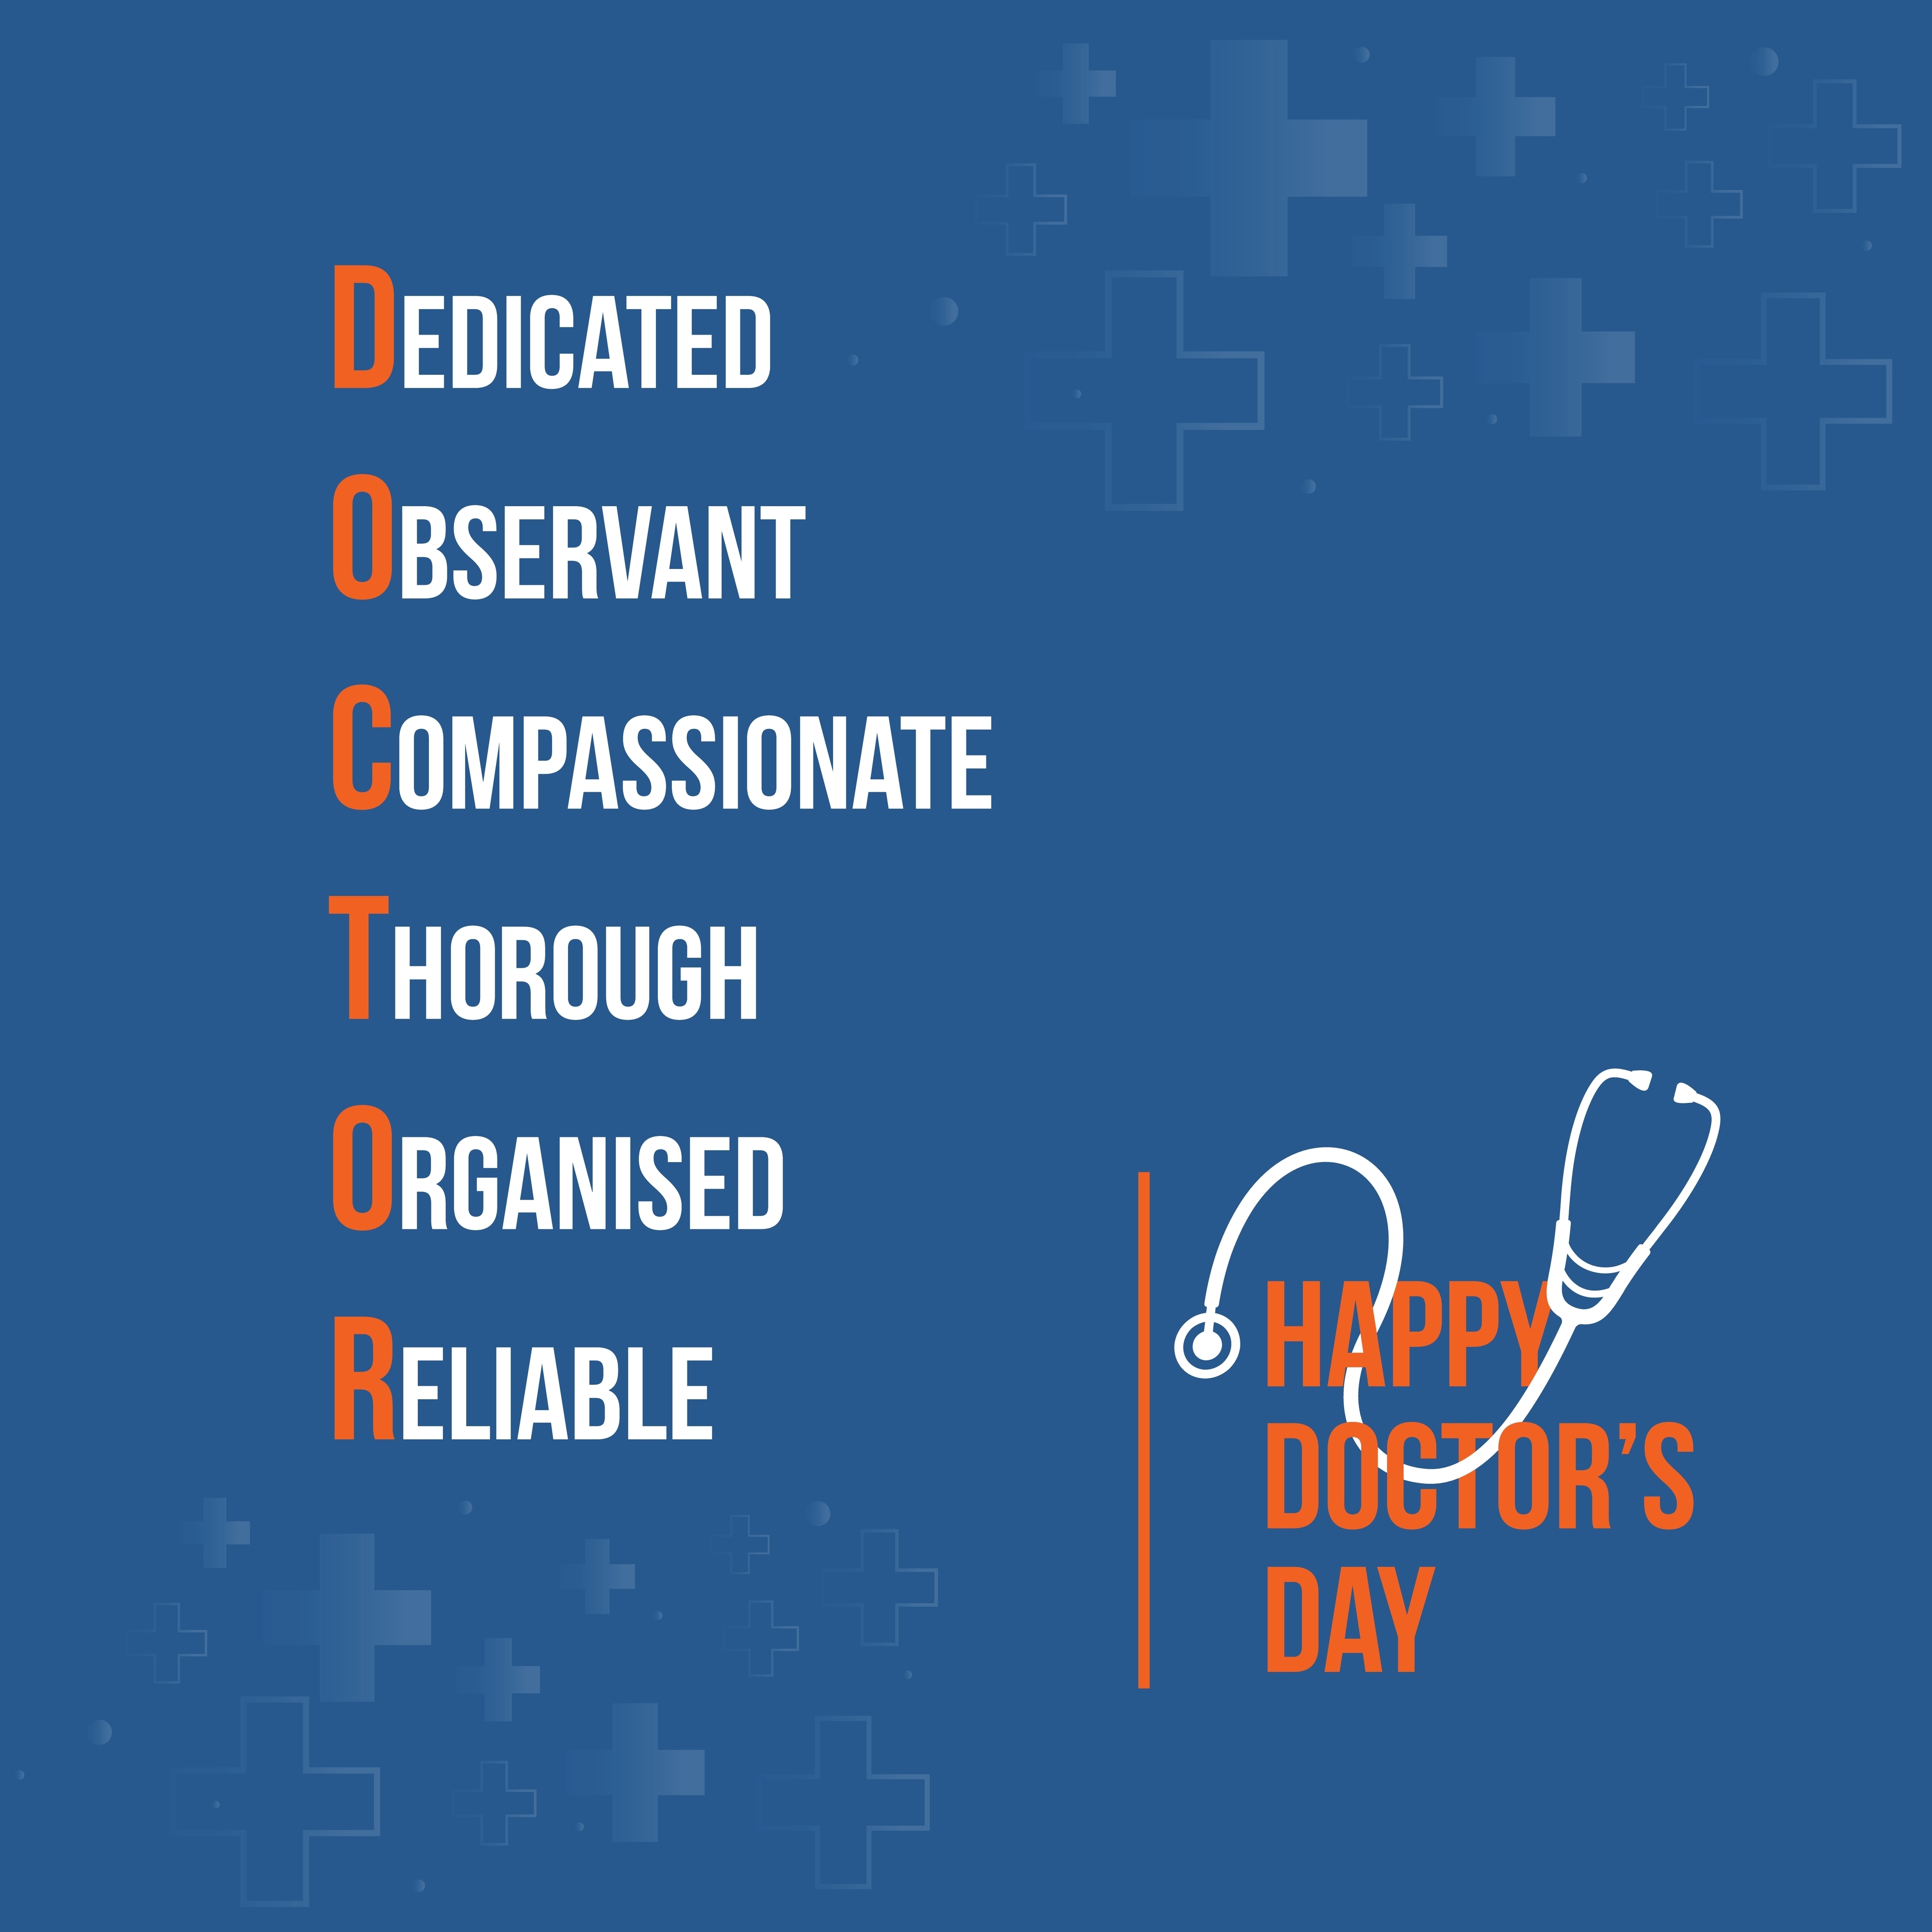 Happy Doctors Day Wishes Messages And Images 2023 Images and Photos